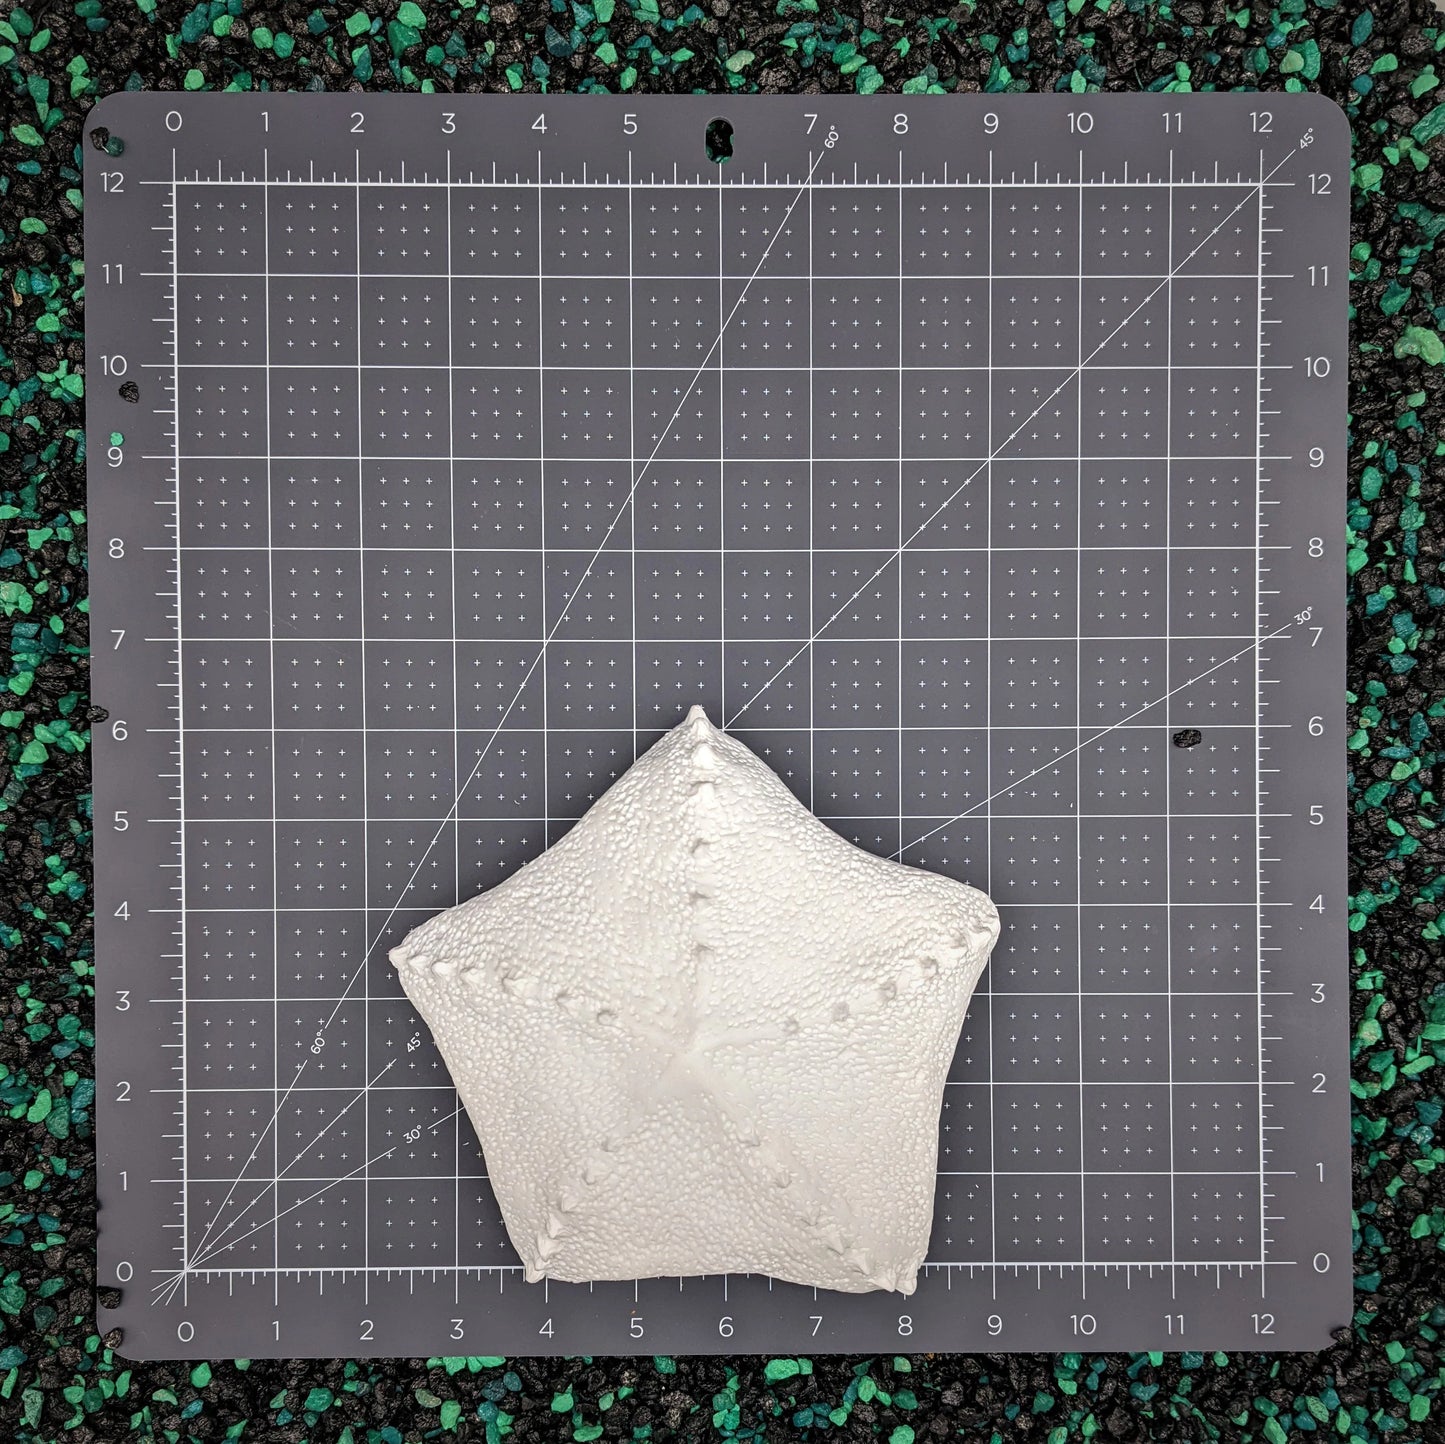 Blank plastic shell set from IDfabrications ID Fabrications for cosplay crafting mermaid tops and merfolk accessories Seashell cushion star starfish